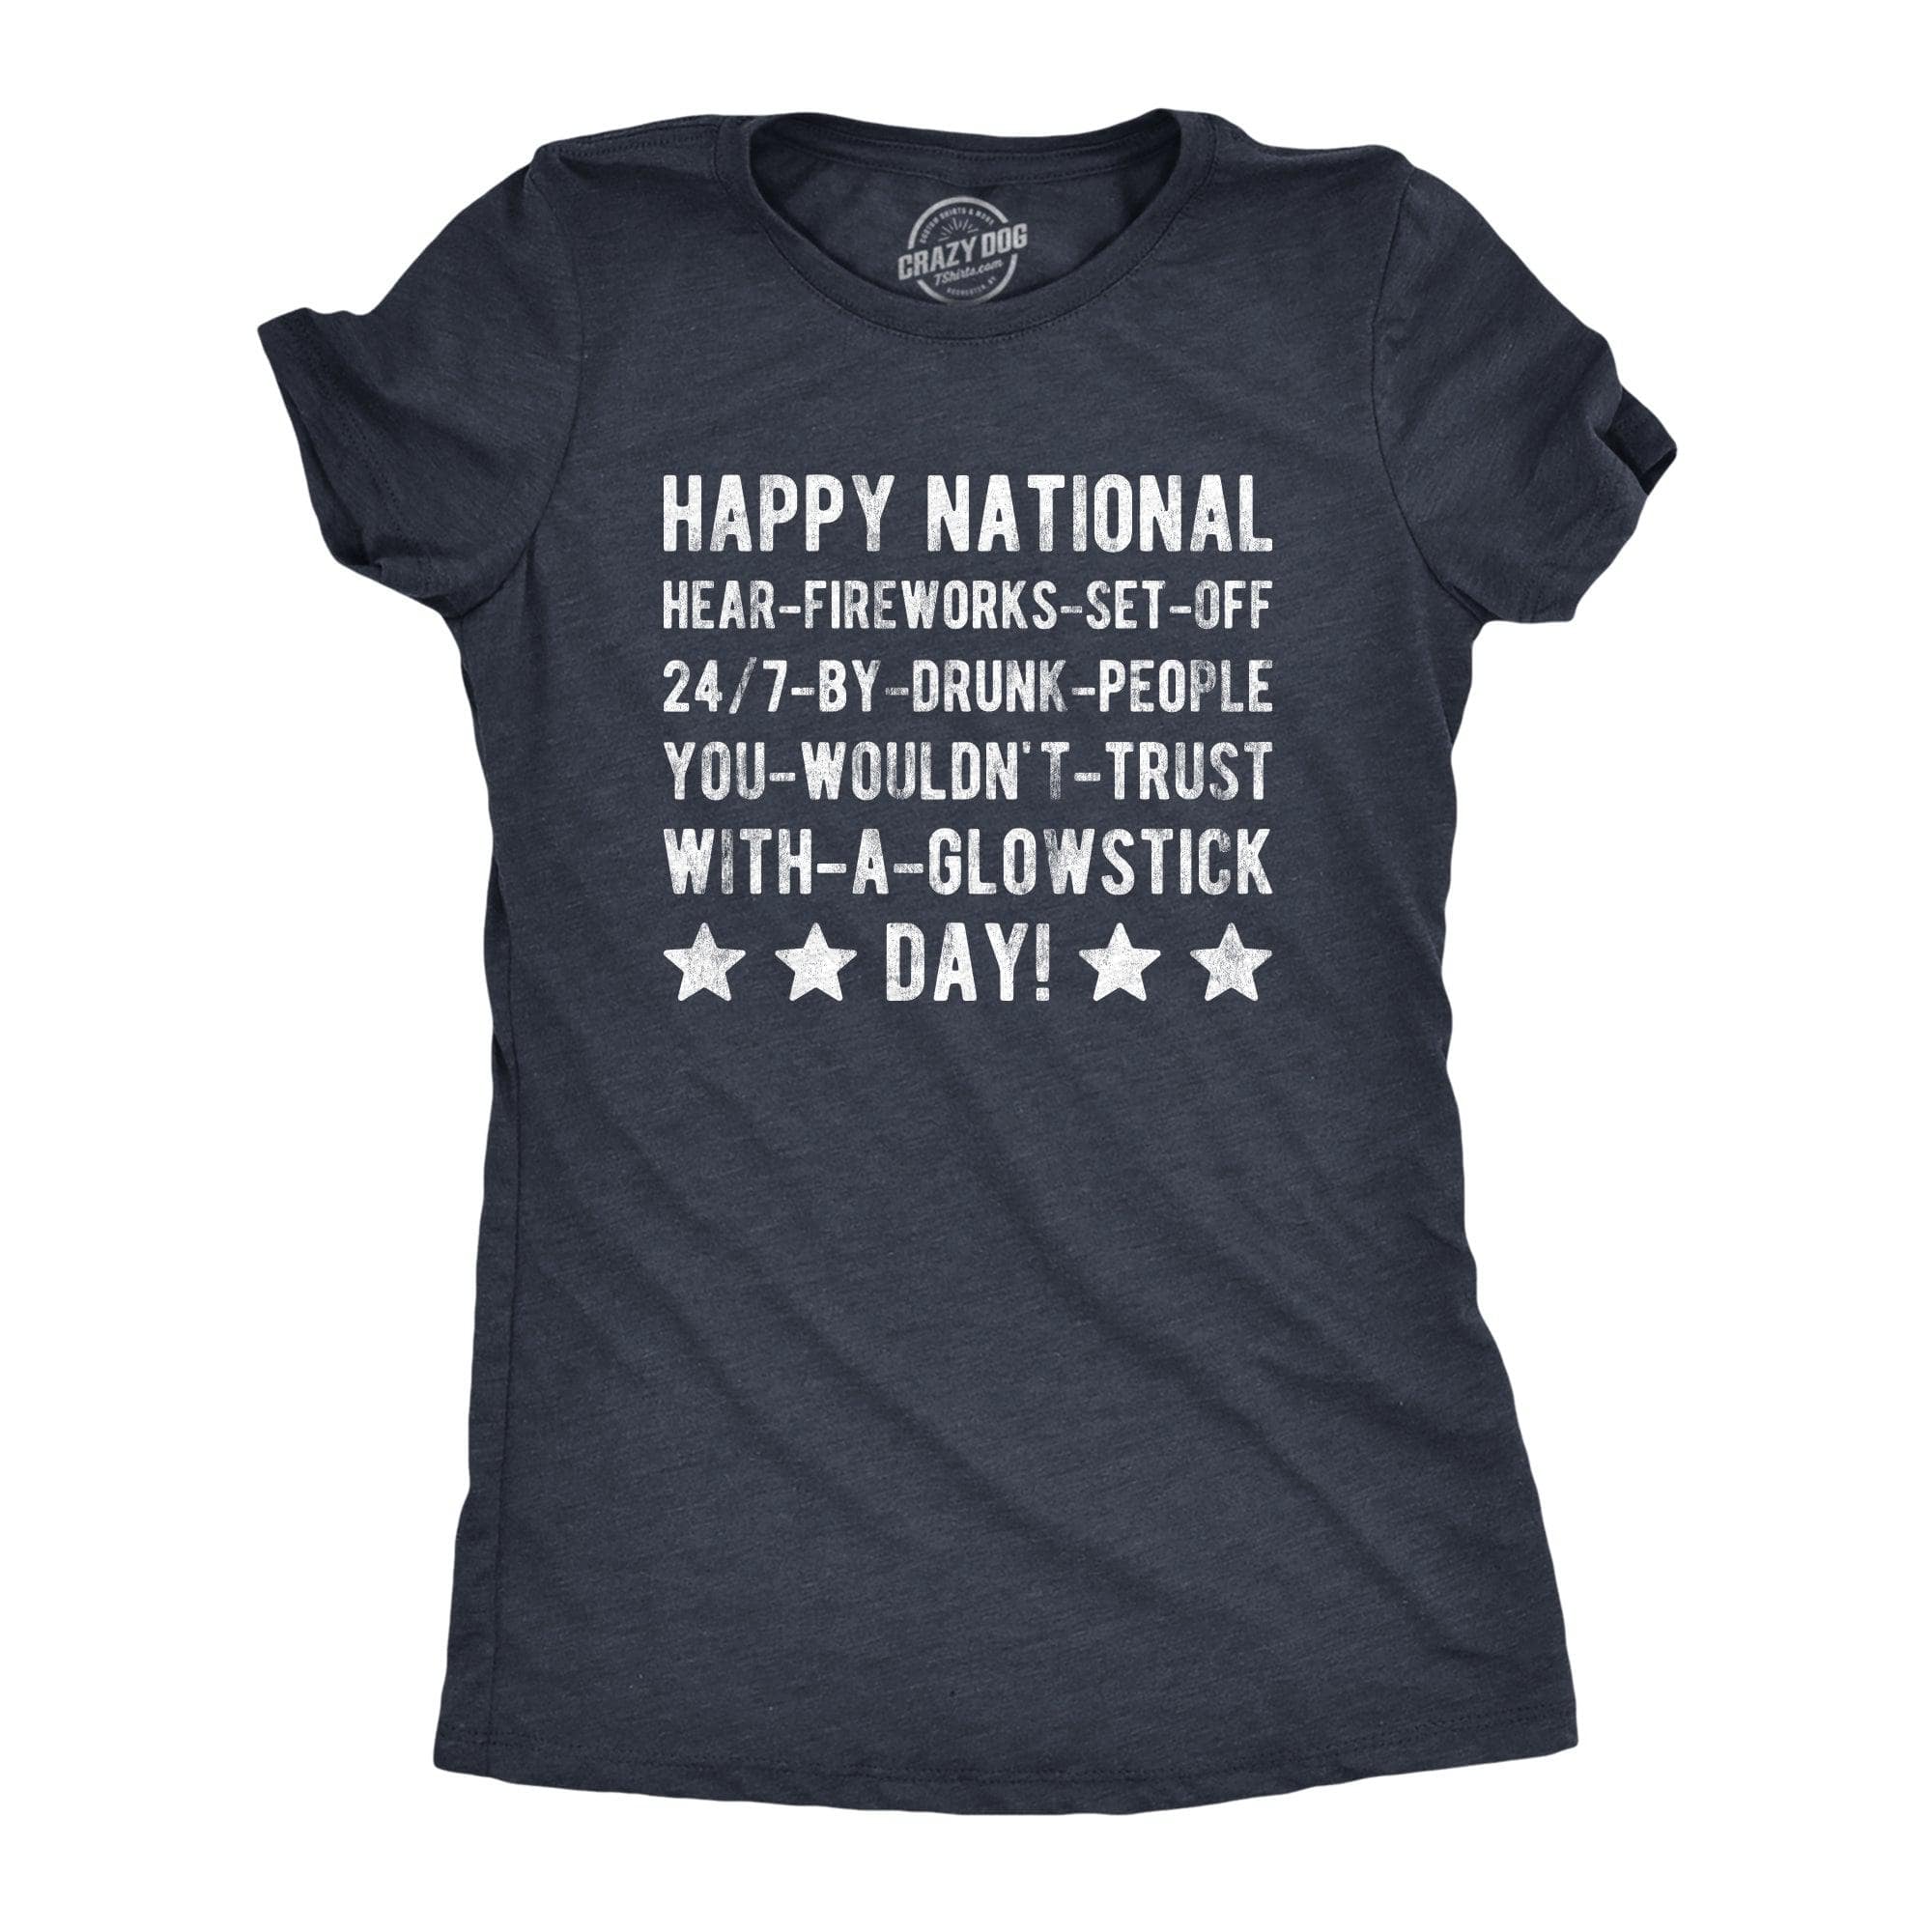 Happy National Fireworks Set Off By Drunk People Day Women's Tshirt  -  Crazy Dog T-Shirts